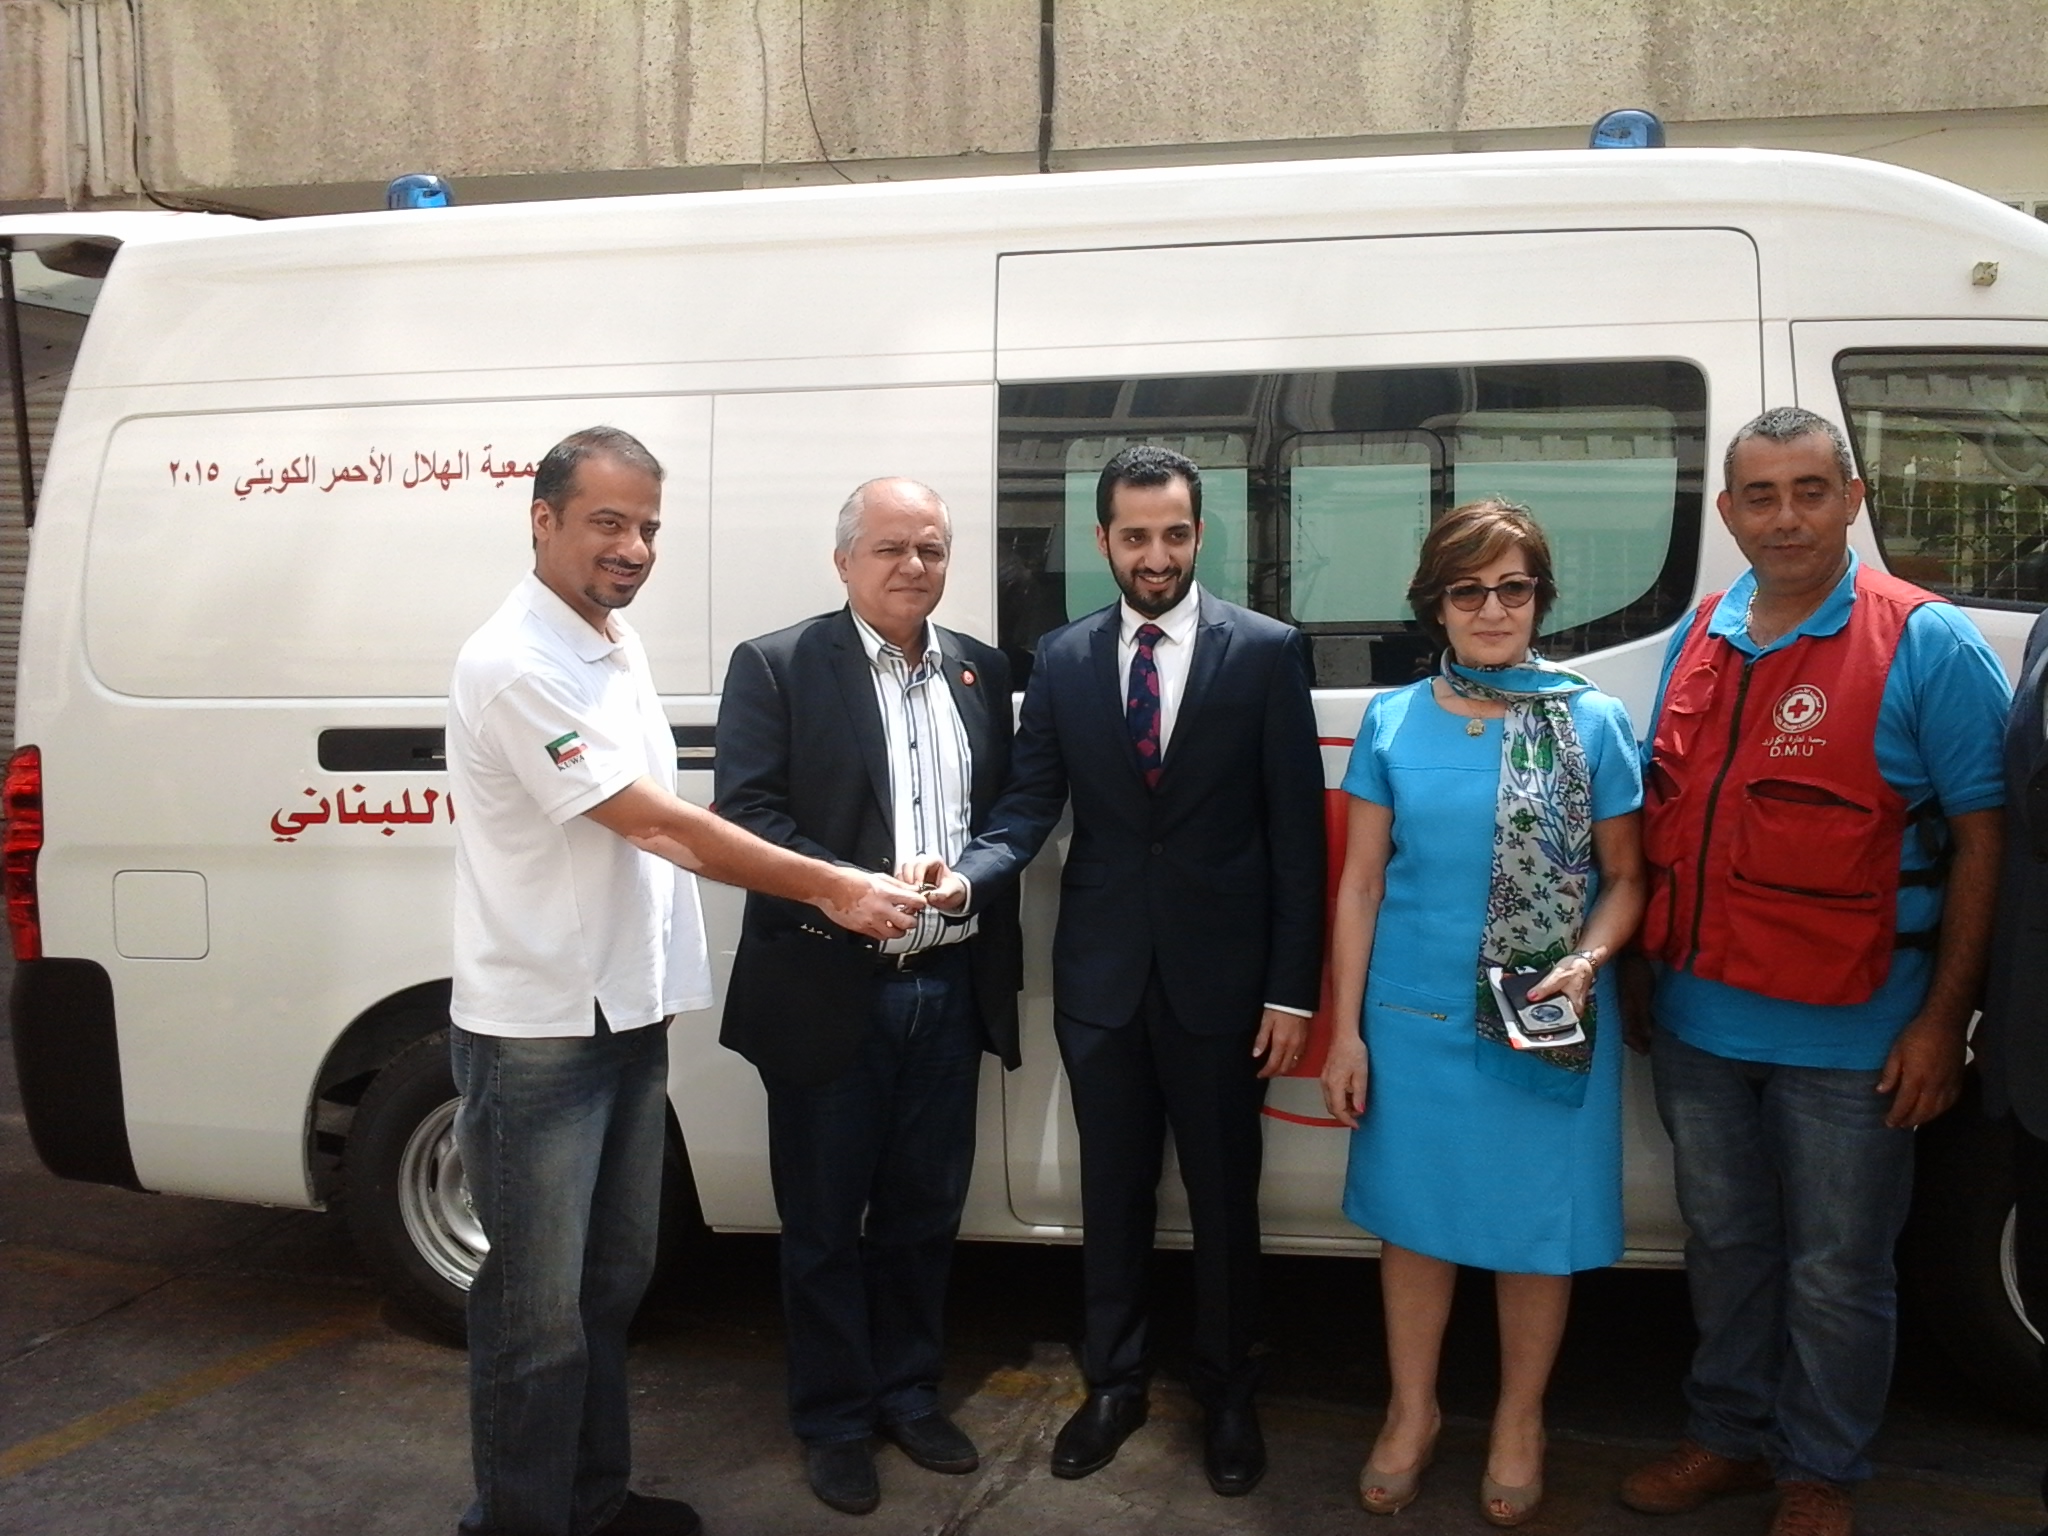 Kuwait Red Crescent Society handing over the mobile clinic to the Lebanese Red Cross